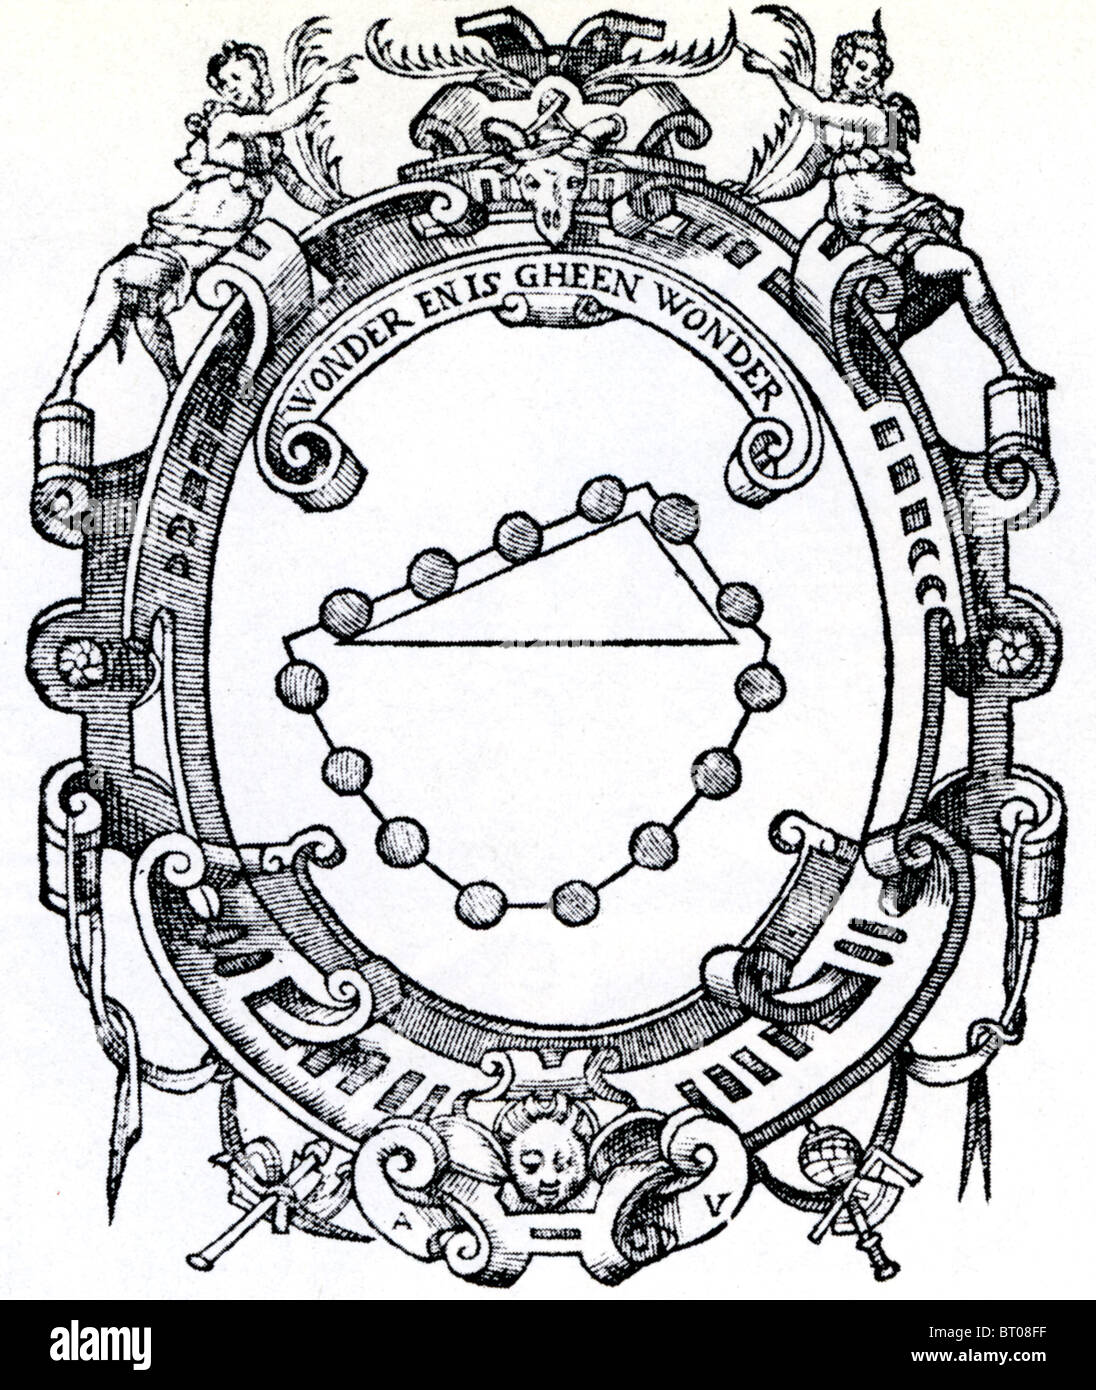 SIMON STEVIN (1548/9 - 1620 Flemish mathematican. Title page of his Principles of Statics (1586)  See Description below Stock Photo